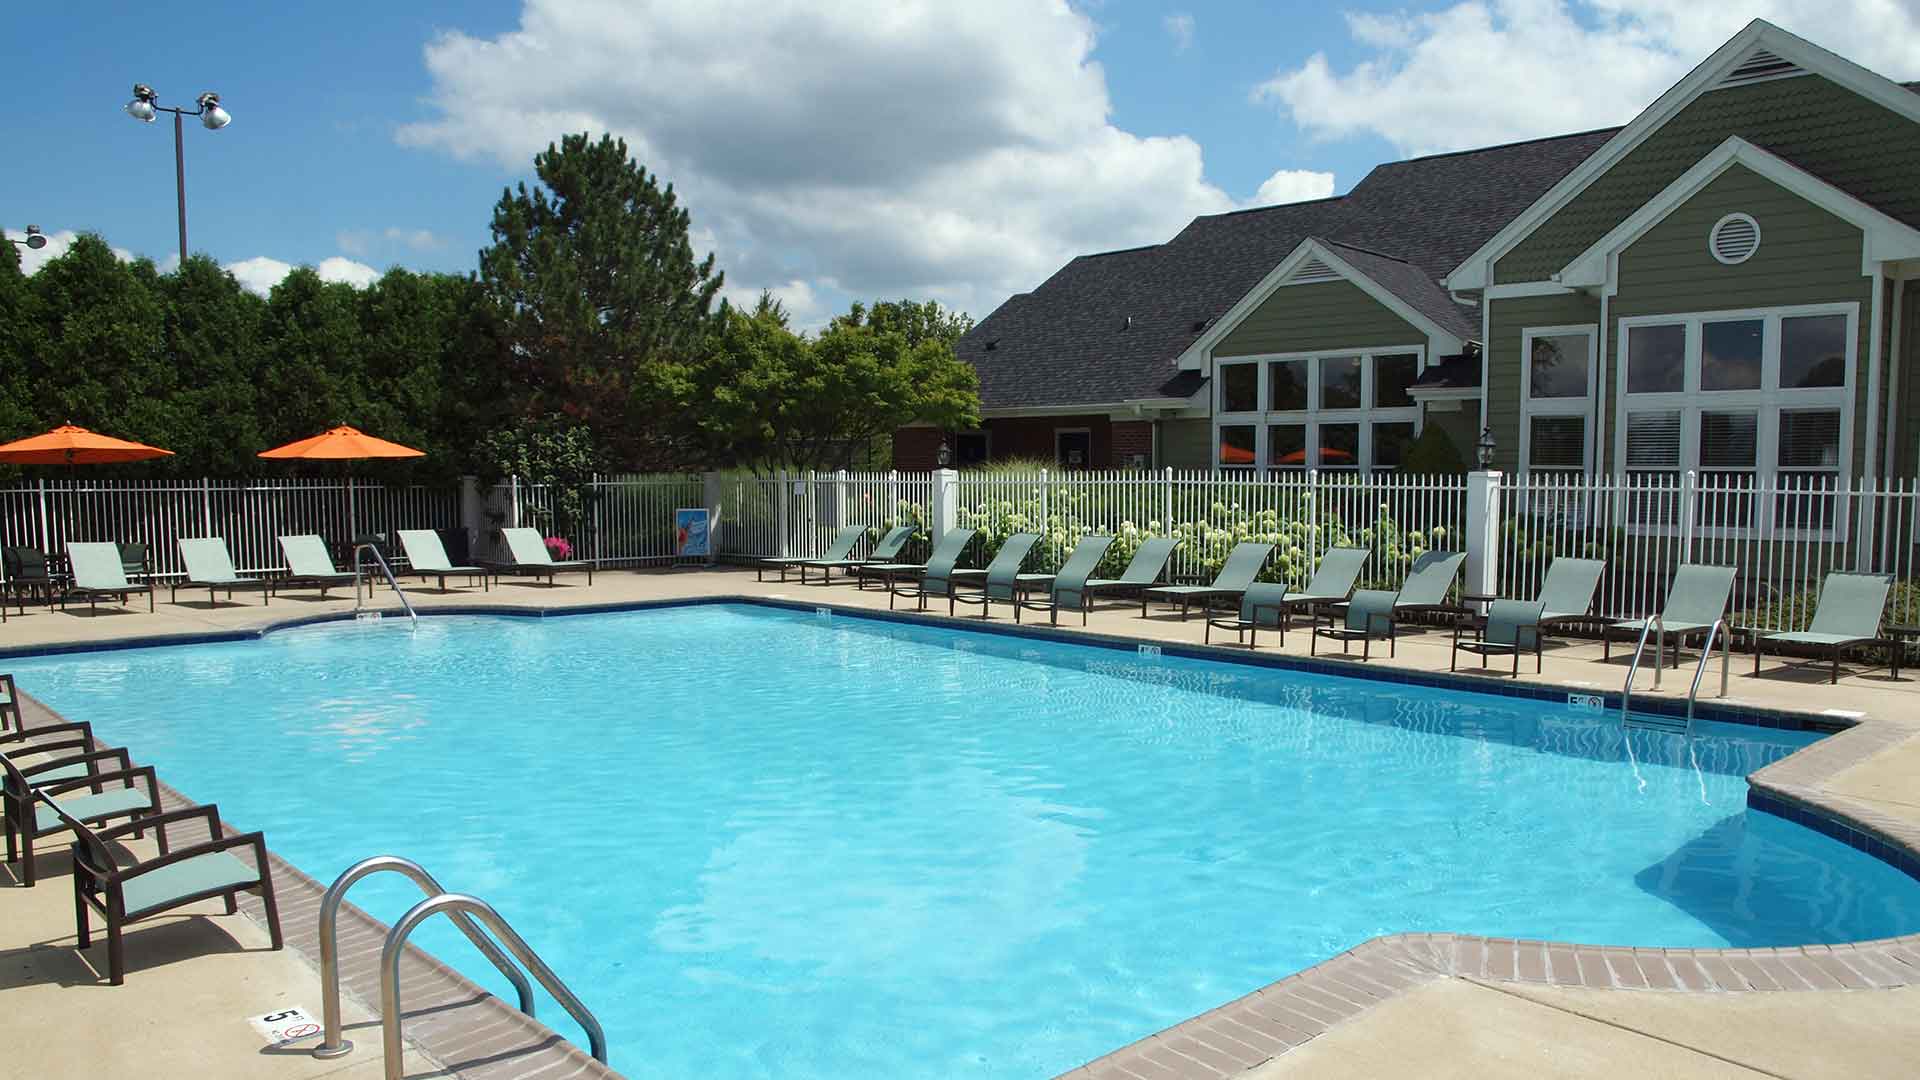 Outdoor pool and lounge chairs next to Wellington Place clubhouse.